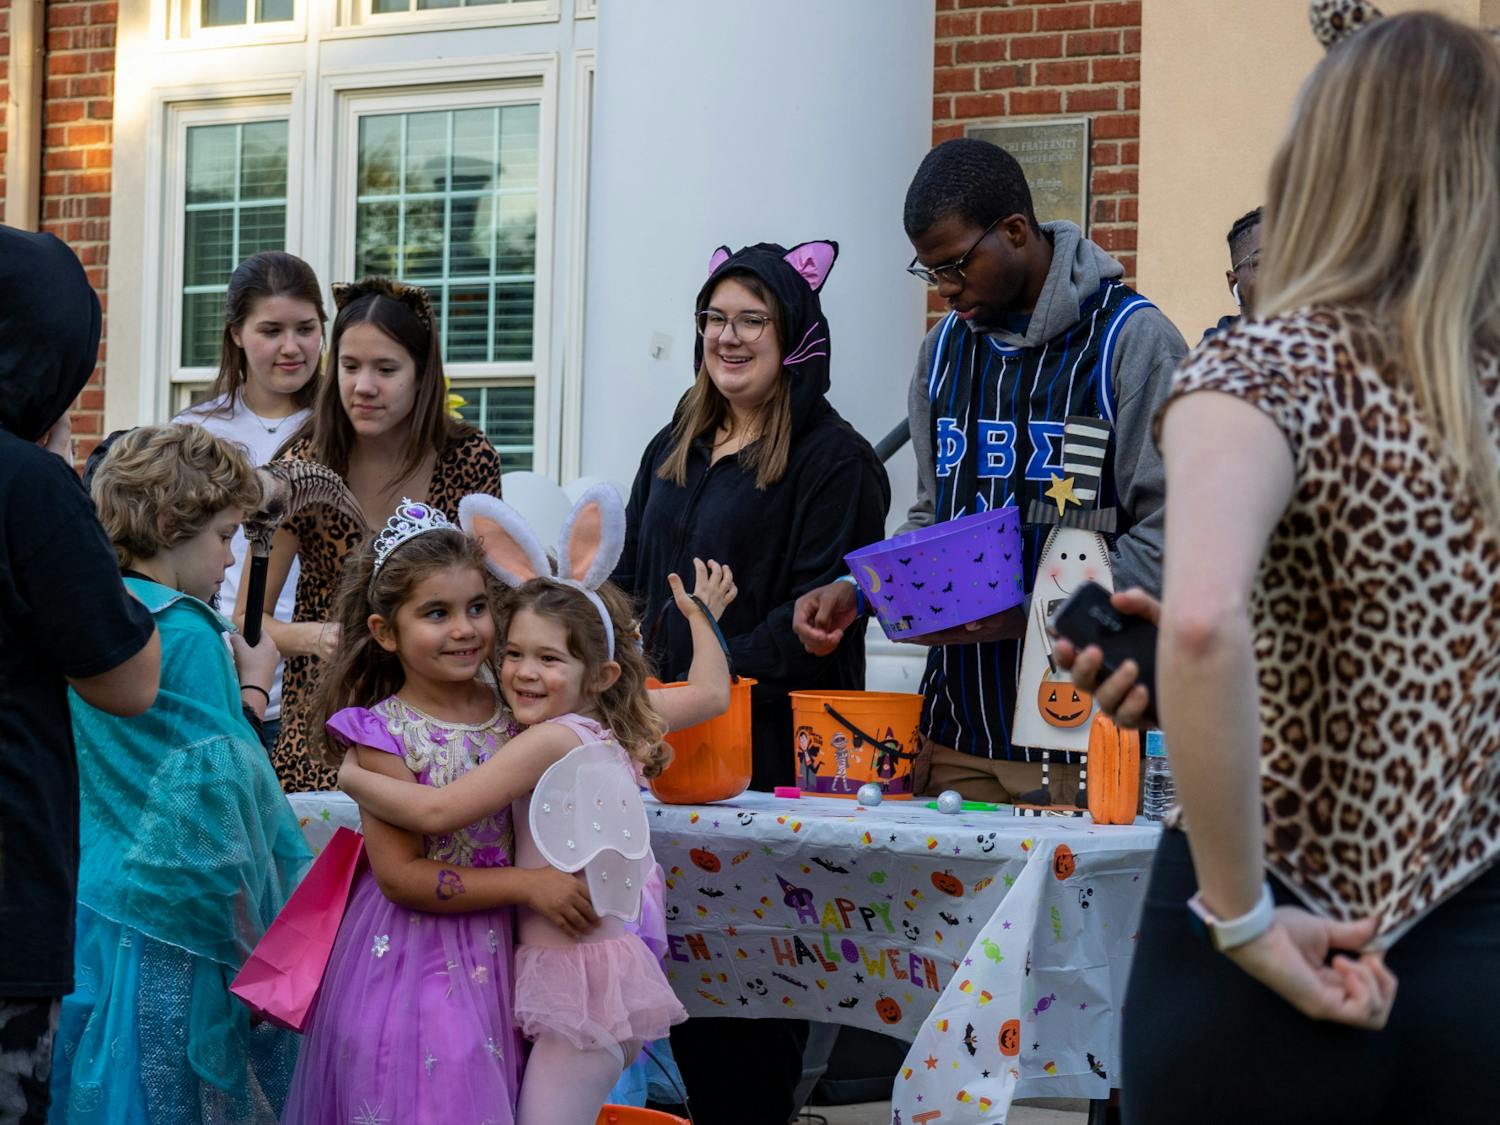 Fraternity and sorority members gather along a decorated table to pass out candy to young trick or treaters on Oct. 25, 2022. USC's Greek Village was home to a trick or treating community event in celebration of Halloween.